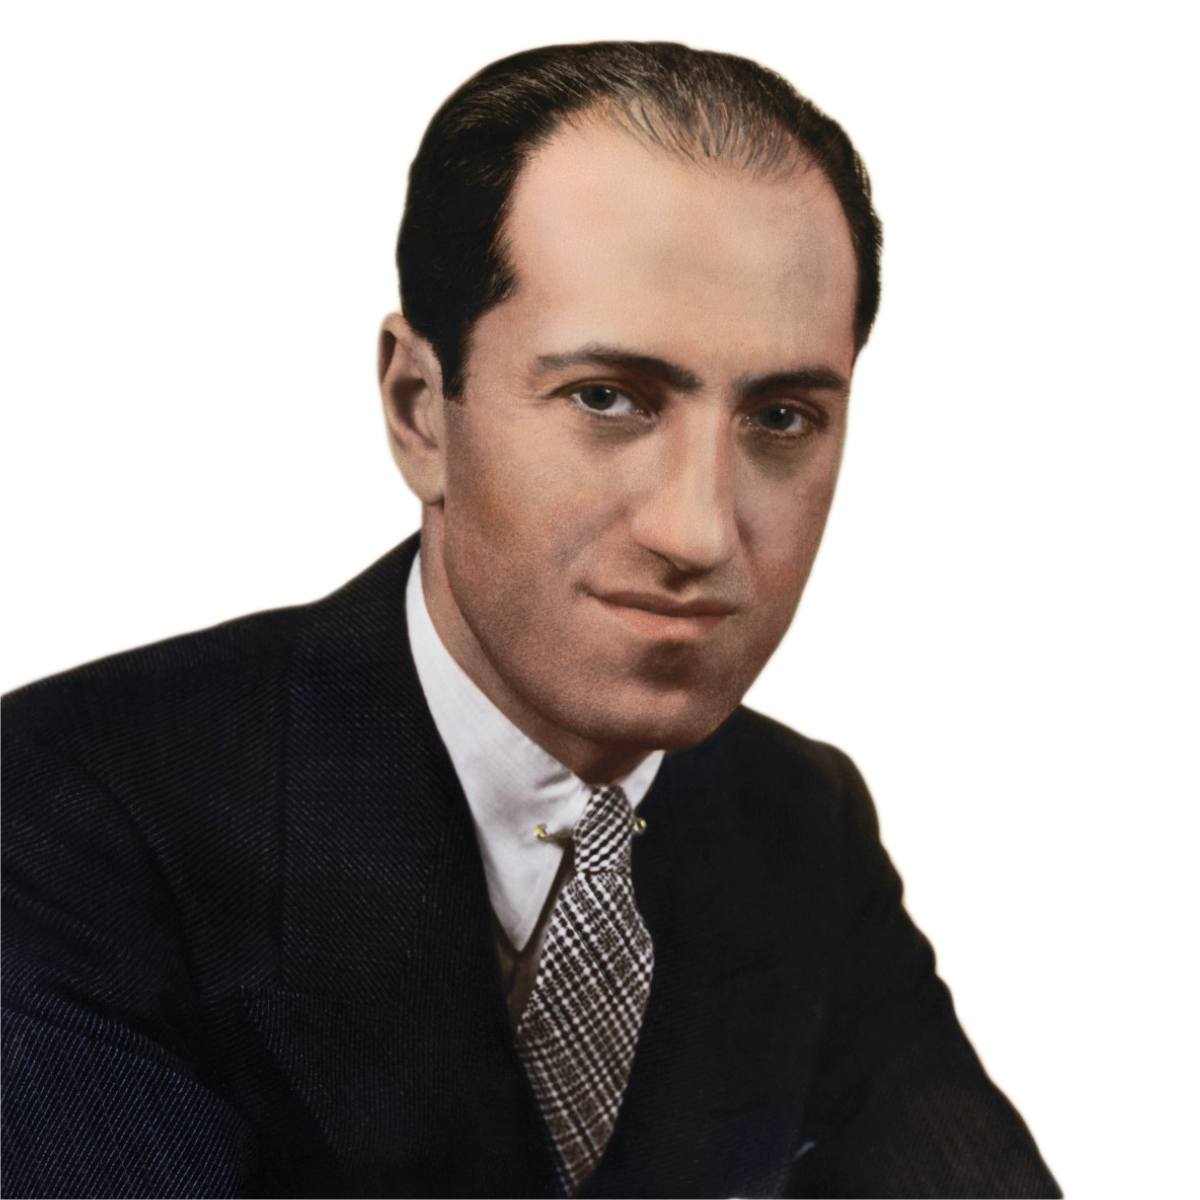 Photograph of composer George Gershwin